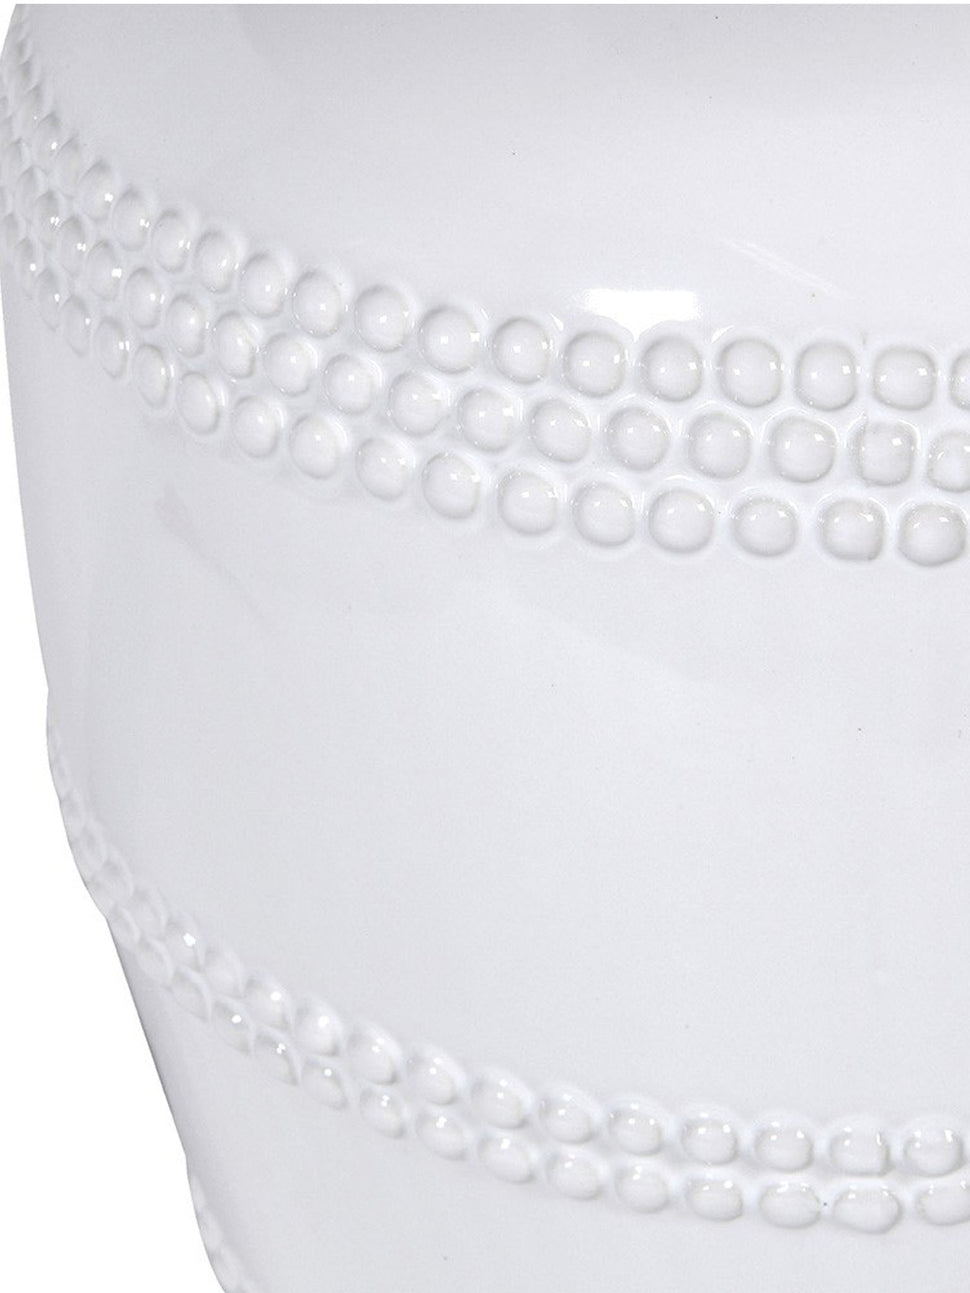 white ceramic bobble lamp with beige shade